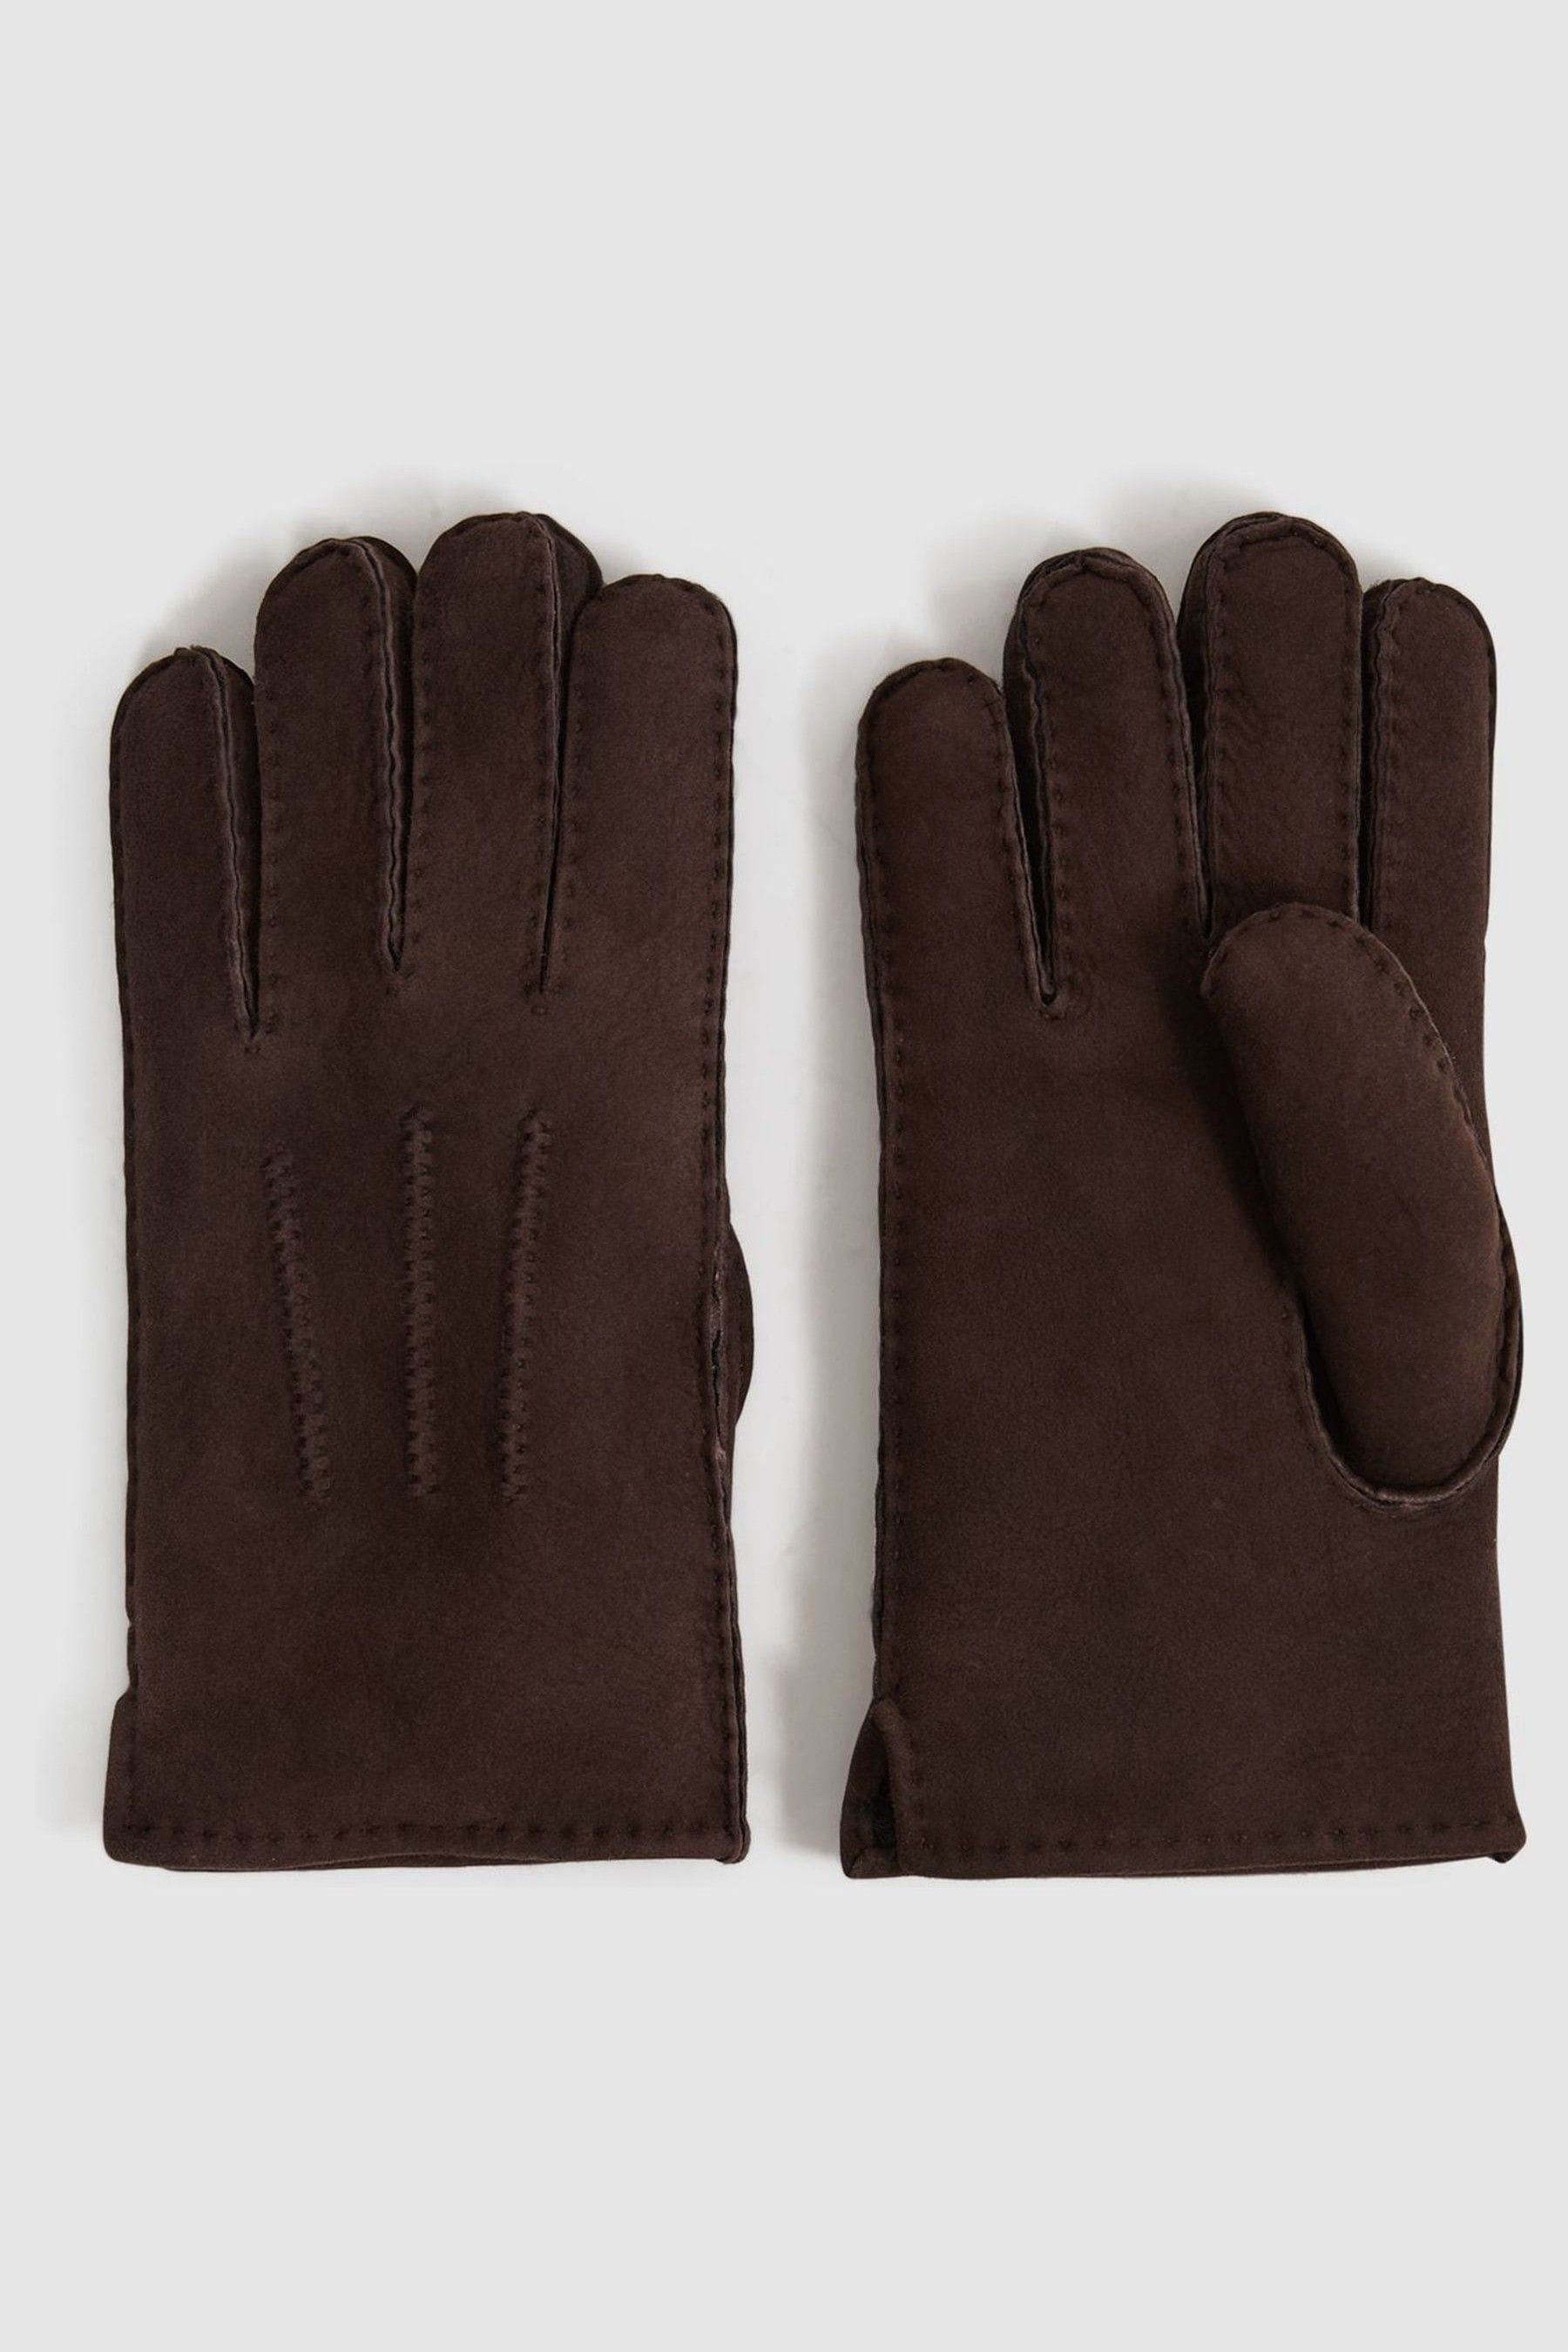 Reiss Aragon - Chocolate Aragon Suede Shearling Gloves, M